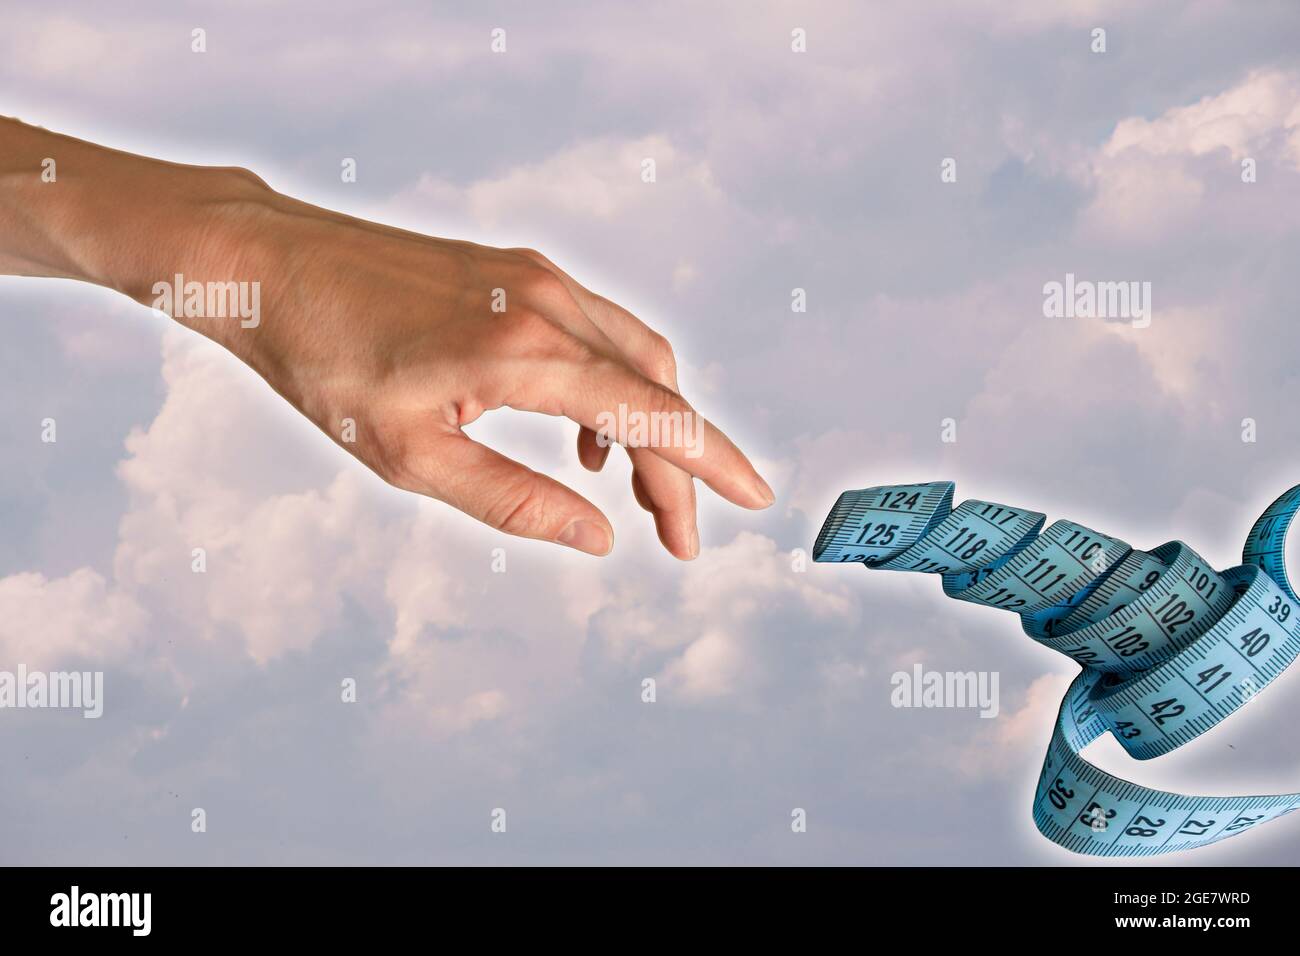 A woman hand is outstretched to touch a blue measurement tape on the cloud sky background, based on the painting The Creation of Adam by Michelangelo Stock Photo